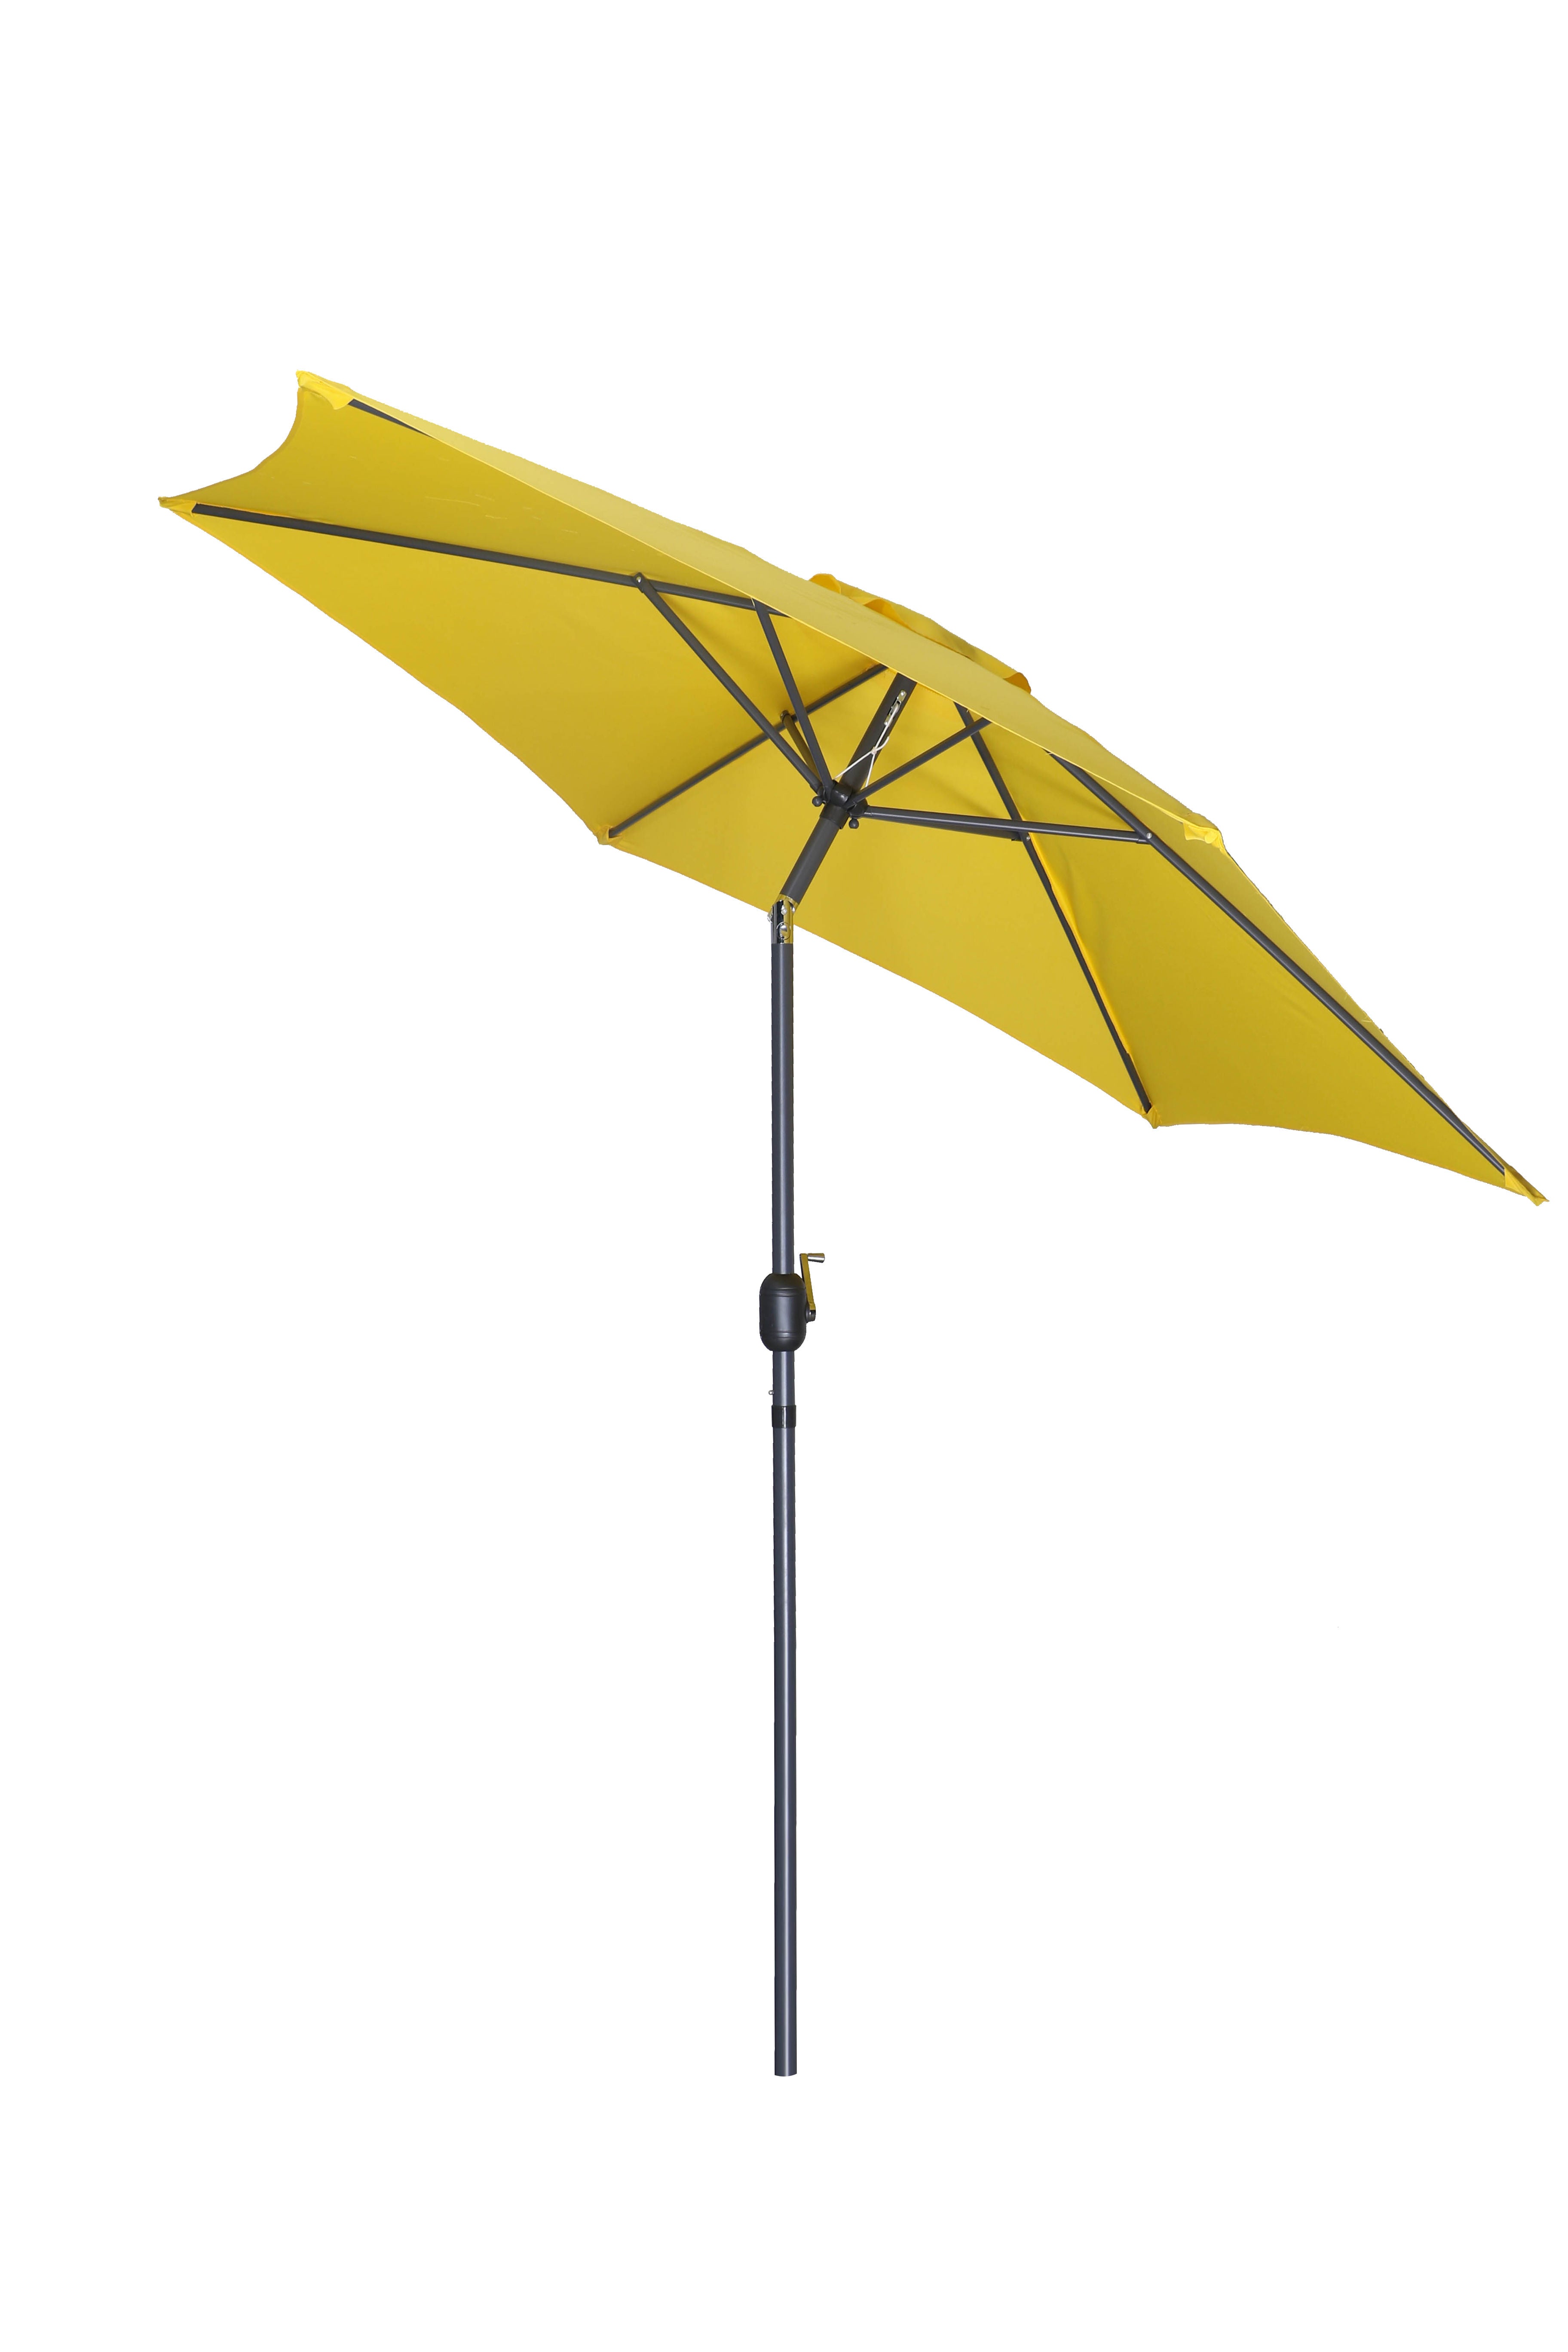 PatioZone 9' Tilting Market Umbrella (Cover Incl.) in UV-Protected Polyester (MOSS-T1204J) - Yellow